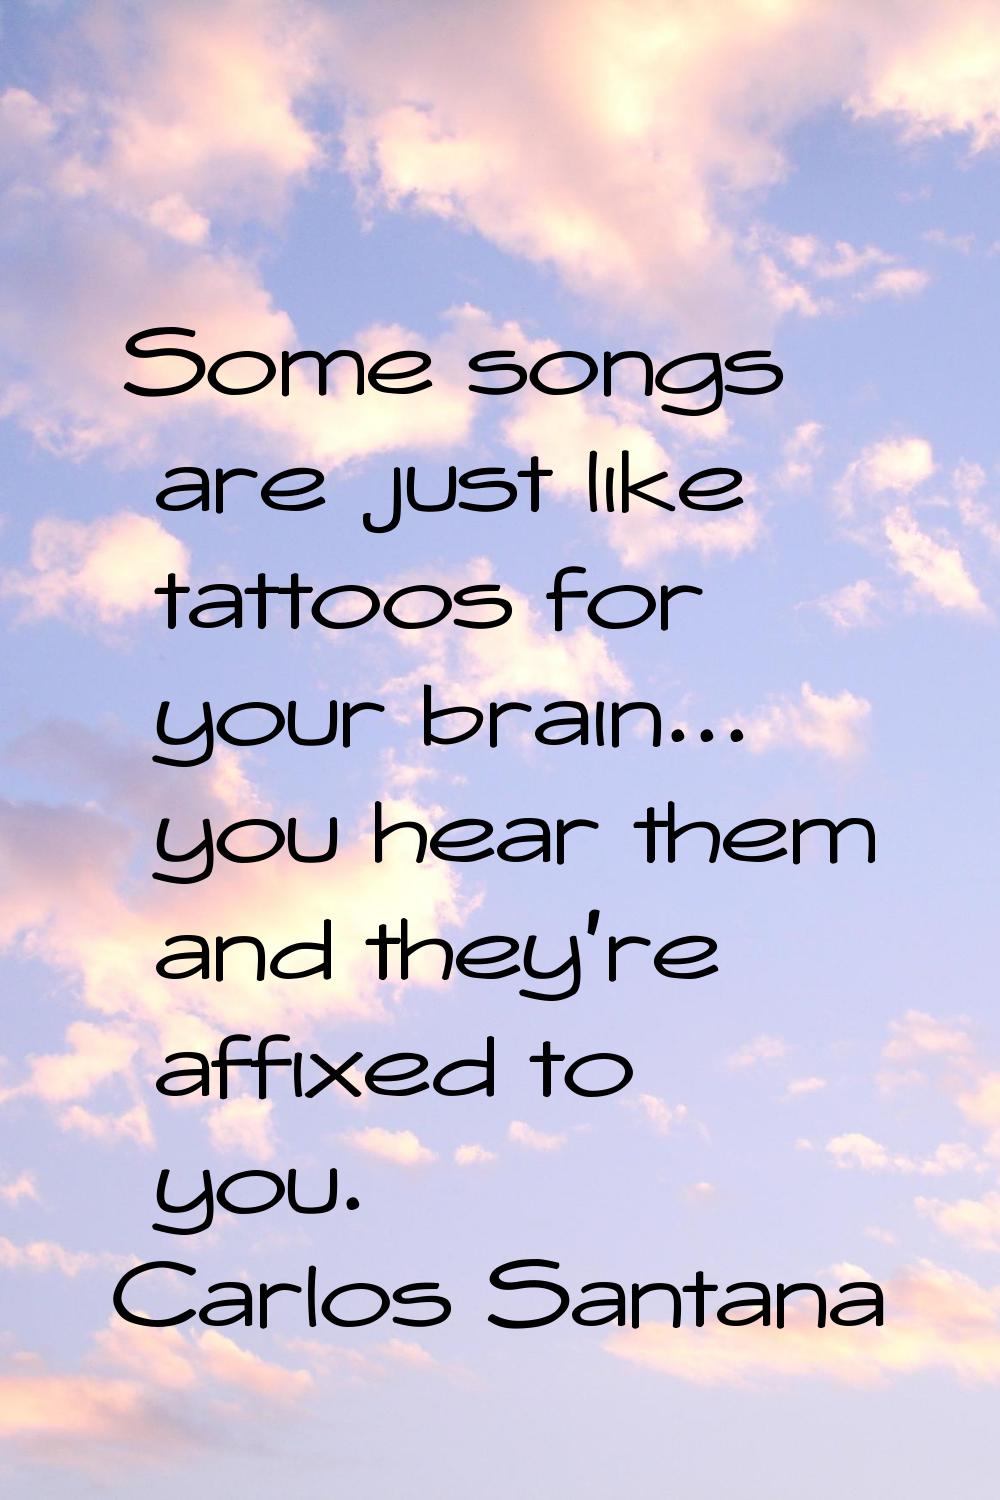 Some songs are just like tattoos for your brain... you hear them and they're affixed to you.